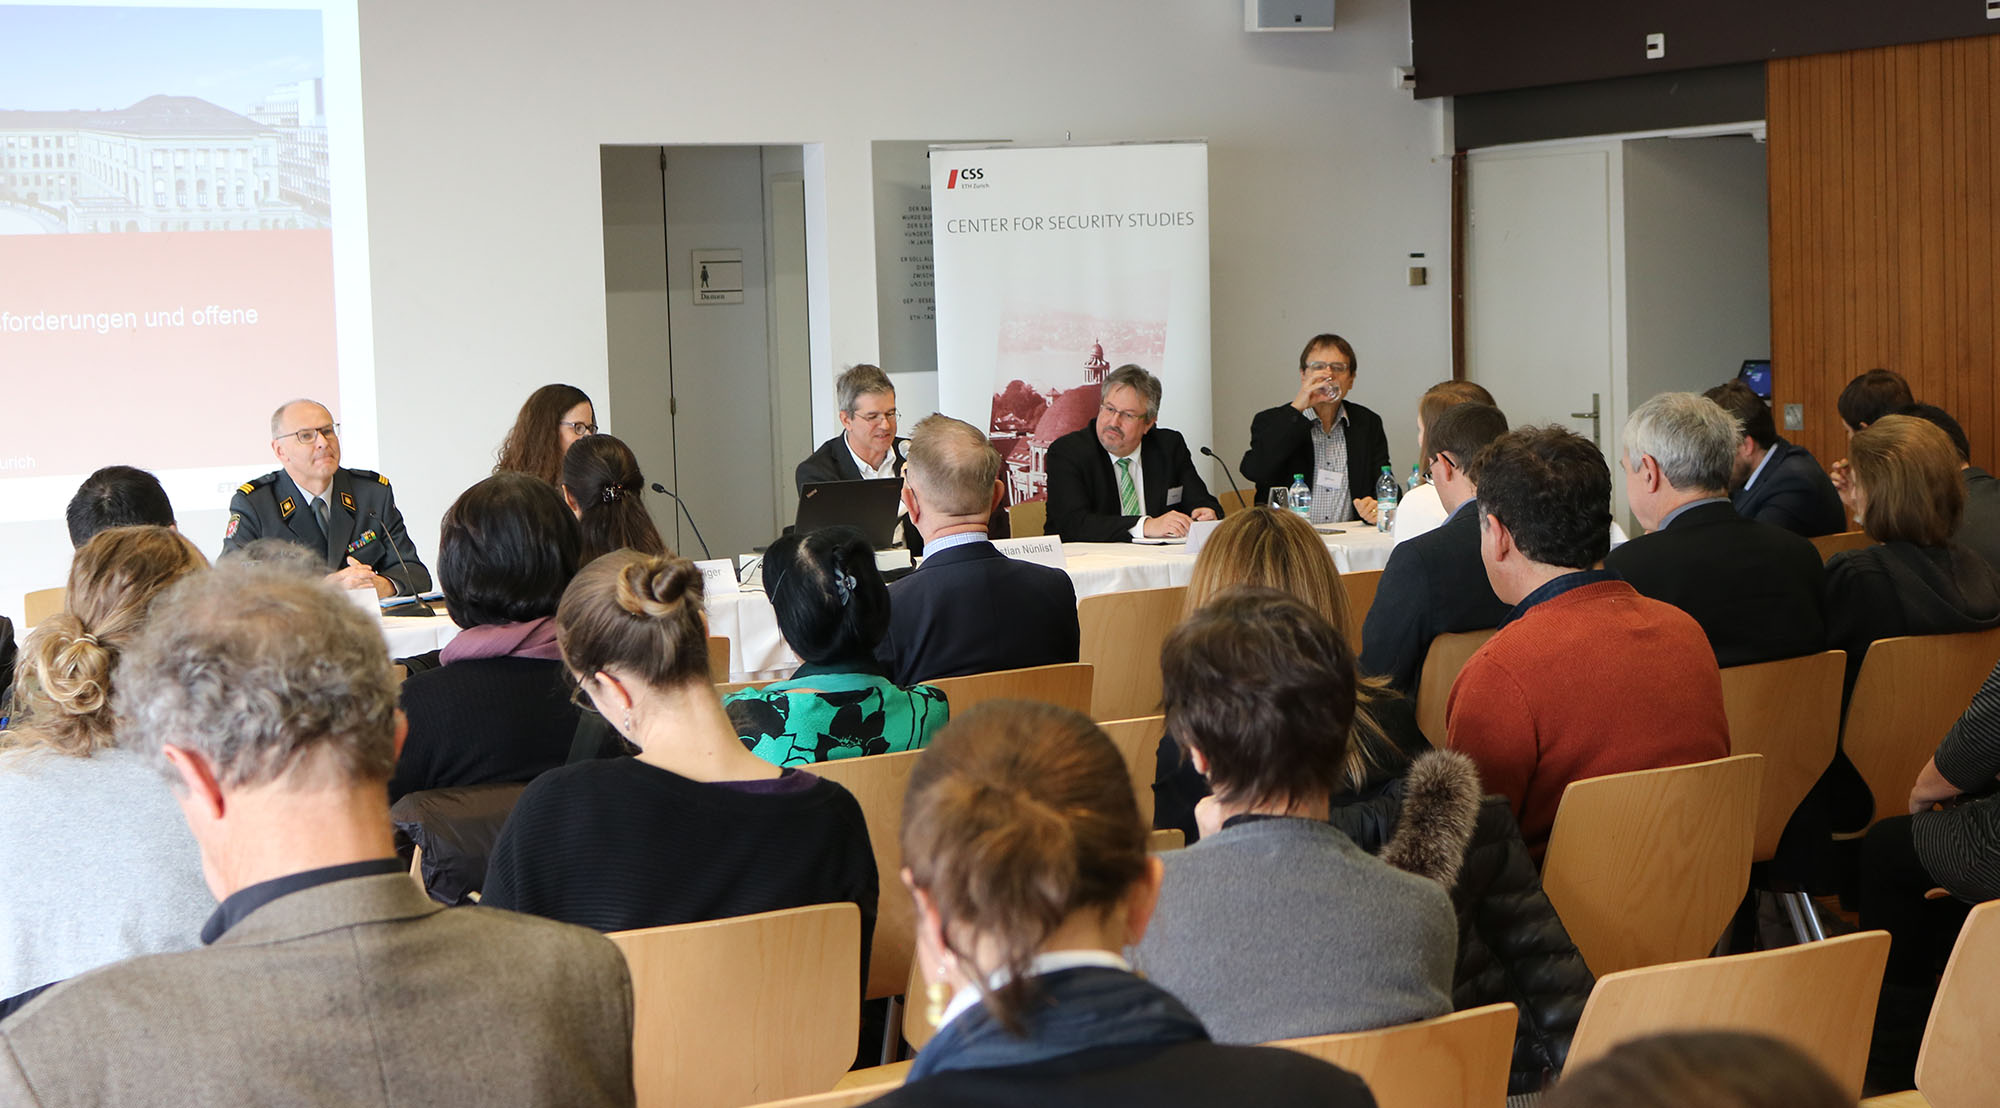 ETH conference on security policy: religion in Swiss peace promotion